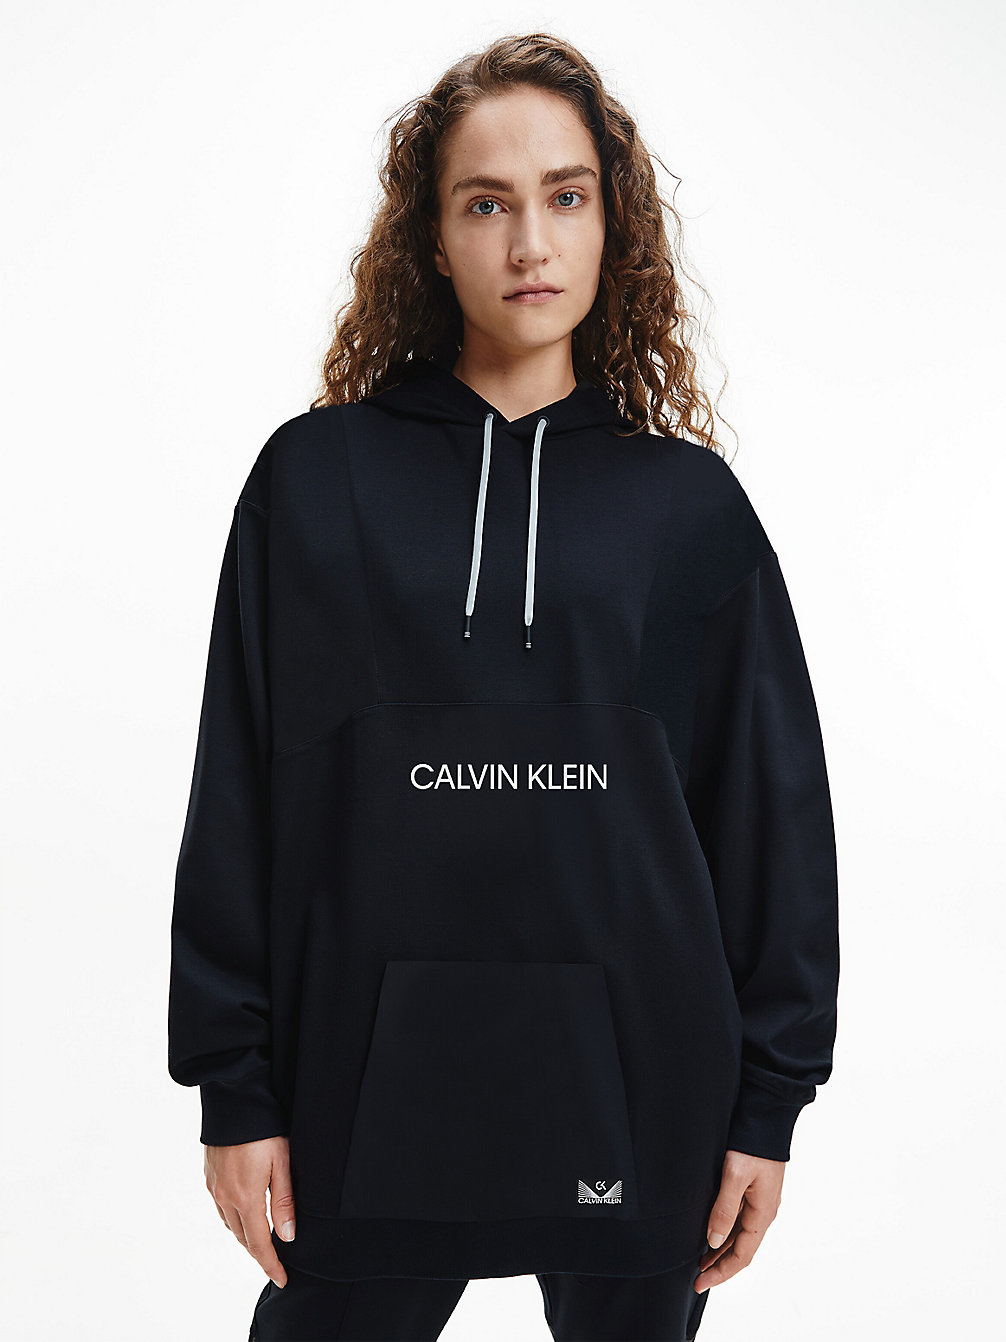 CK BLACK/SILVER REFLECTIVE Relaxed Comfort Stretch Hoodie undefined women Calvin Klein